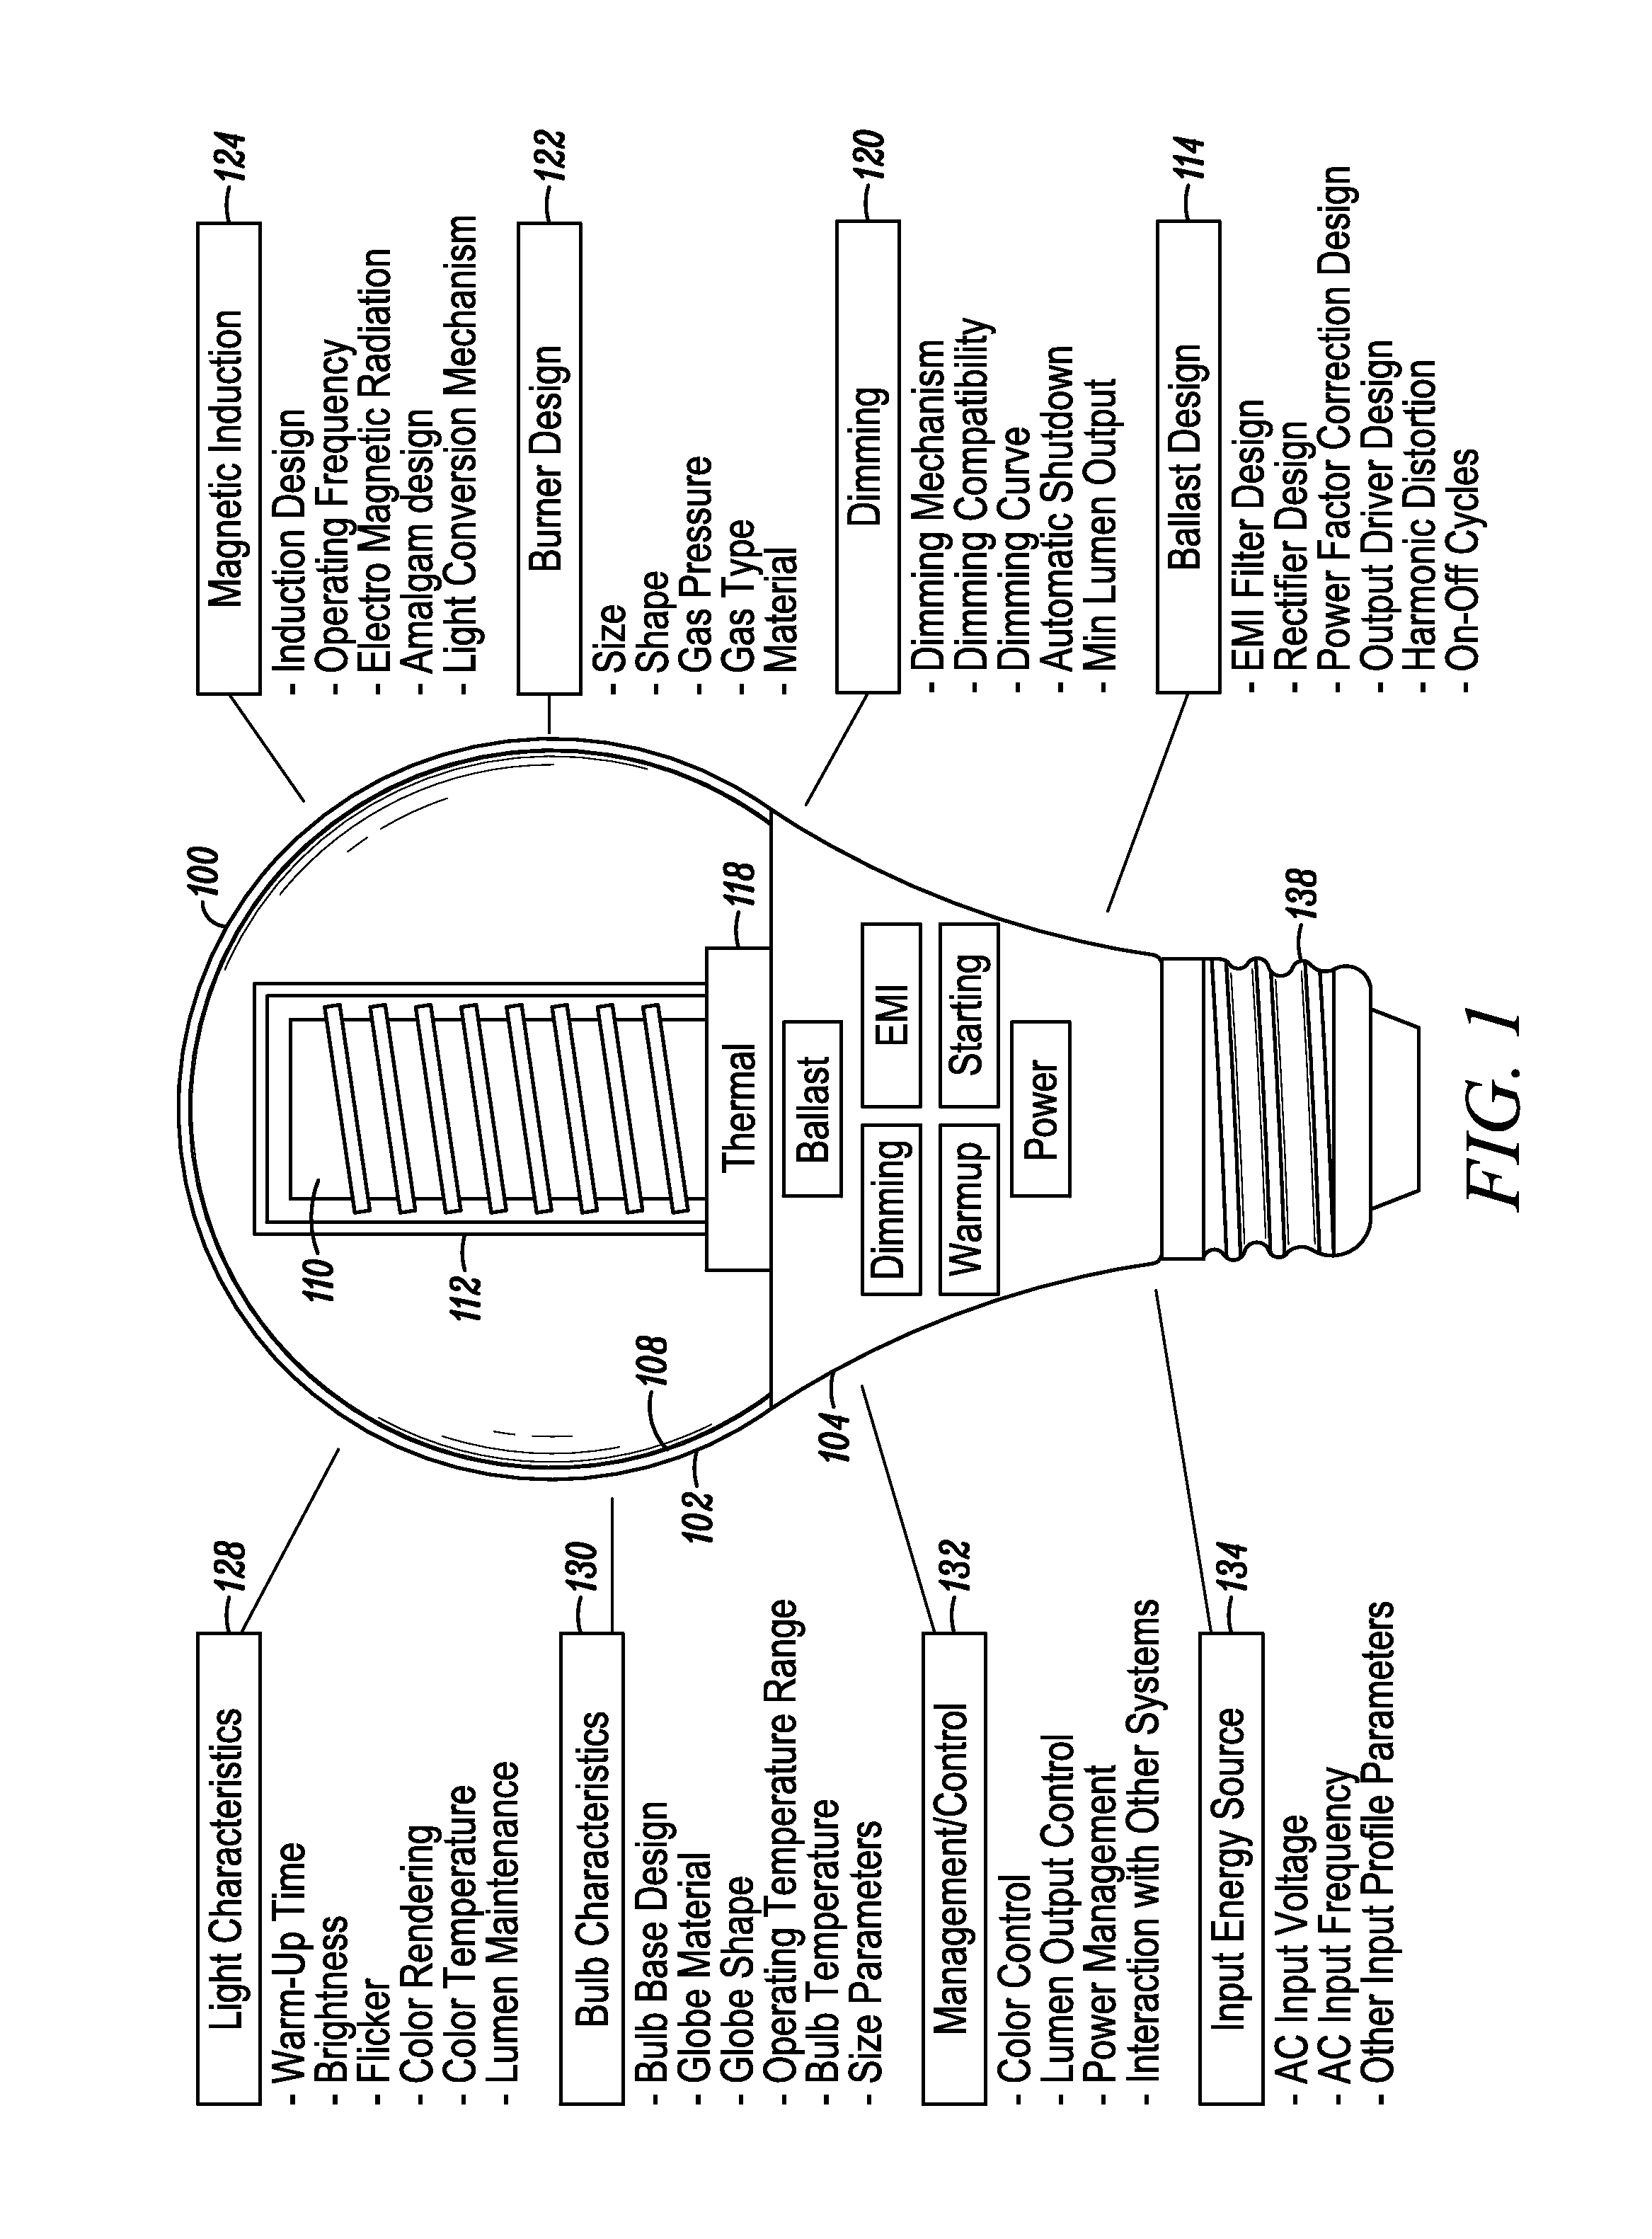 Electronic Ballast Having Improved Power Factor and Total Harmonic Distortion